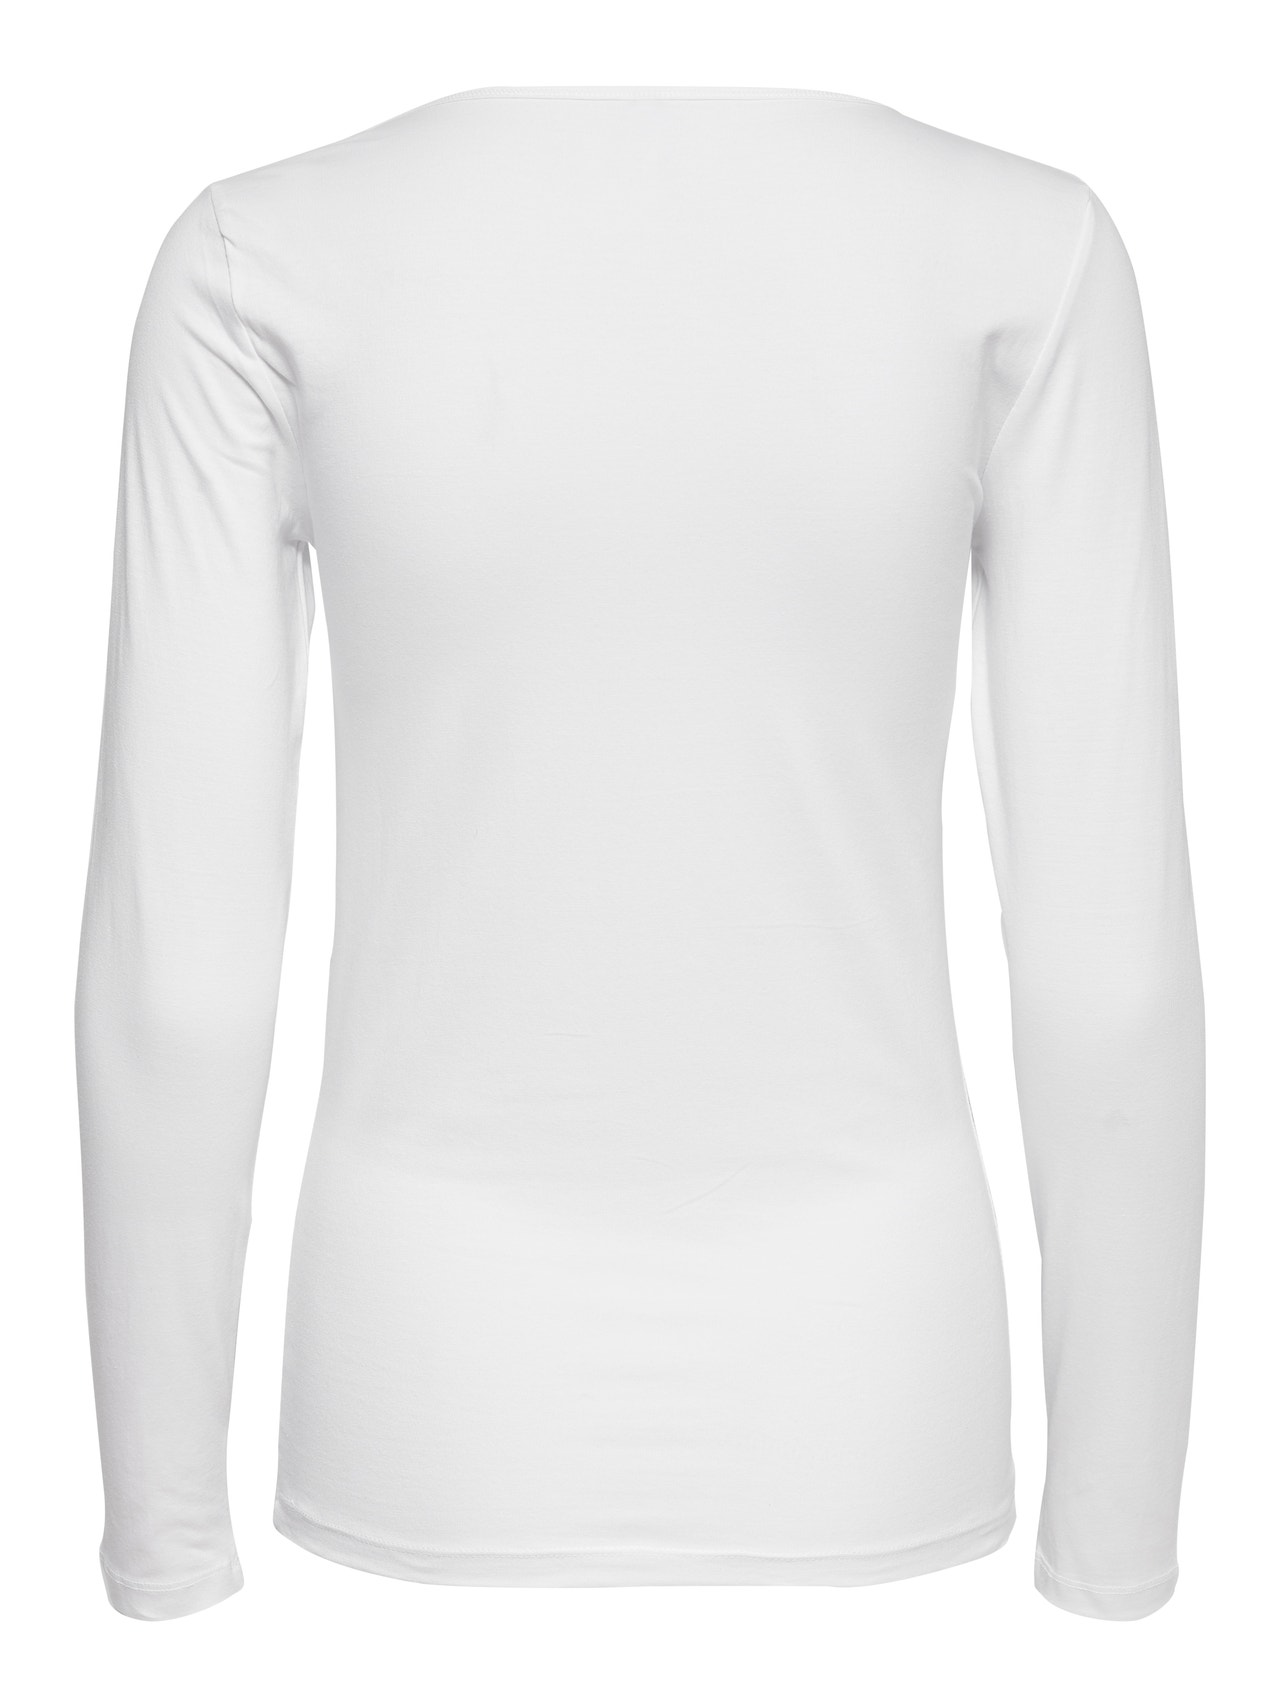 ONLY Basique Top -White - 15204712